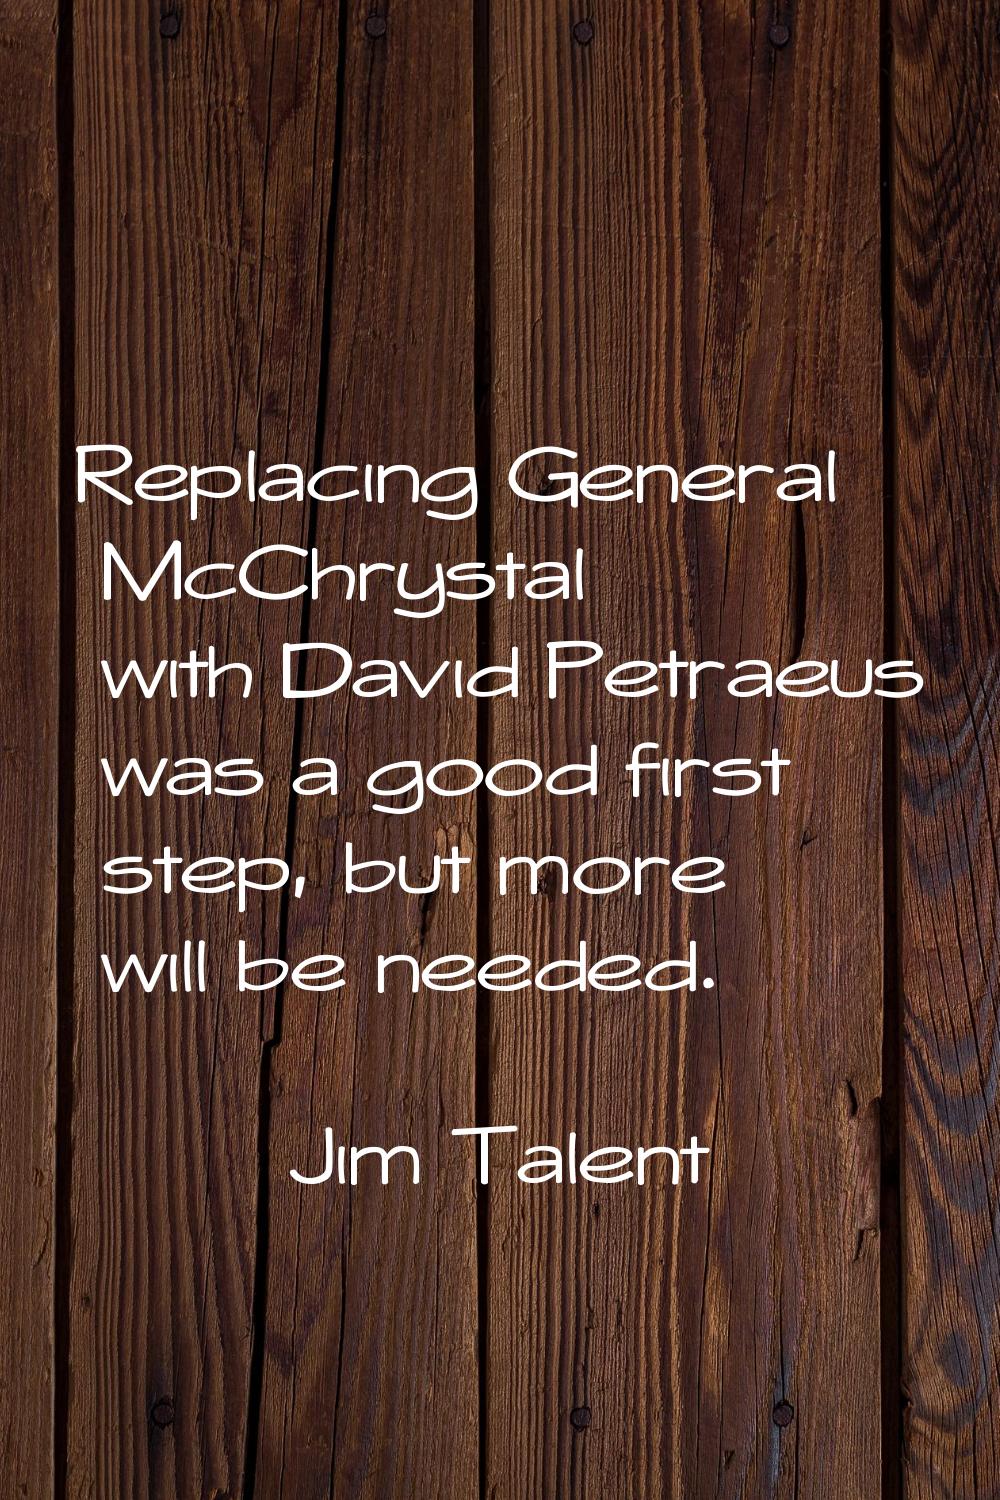 Replacing General McChrystal with David Petraeus was a good first step, but more will be needed.